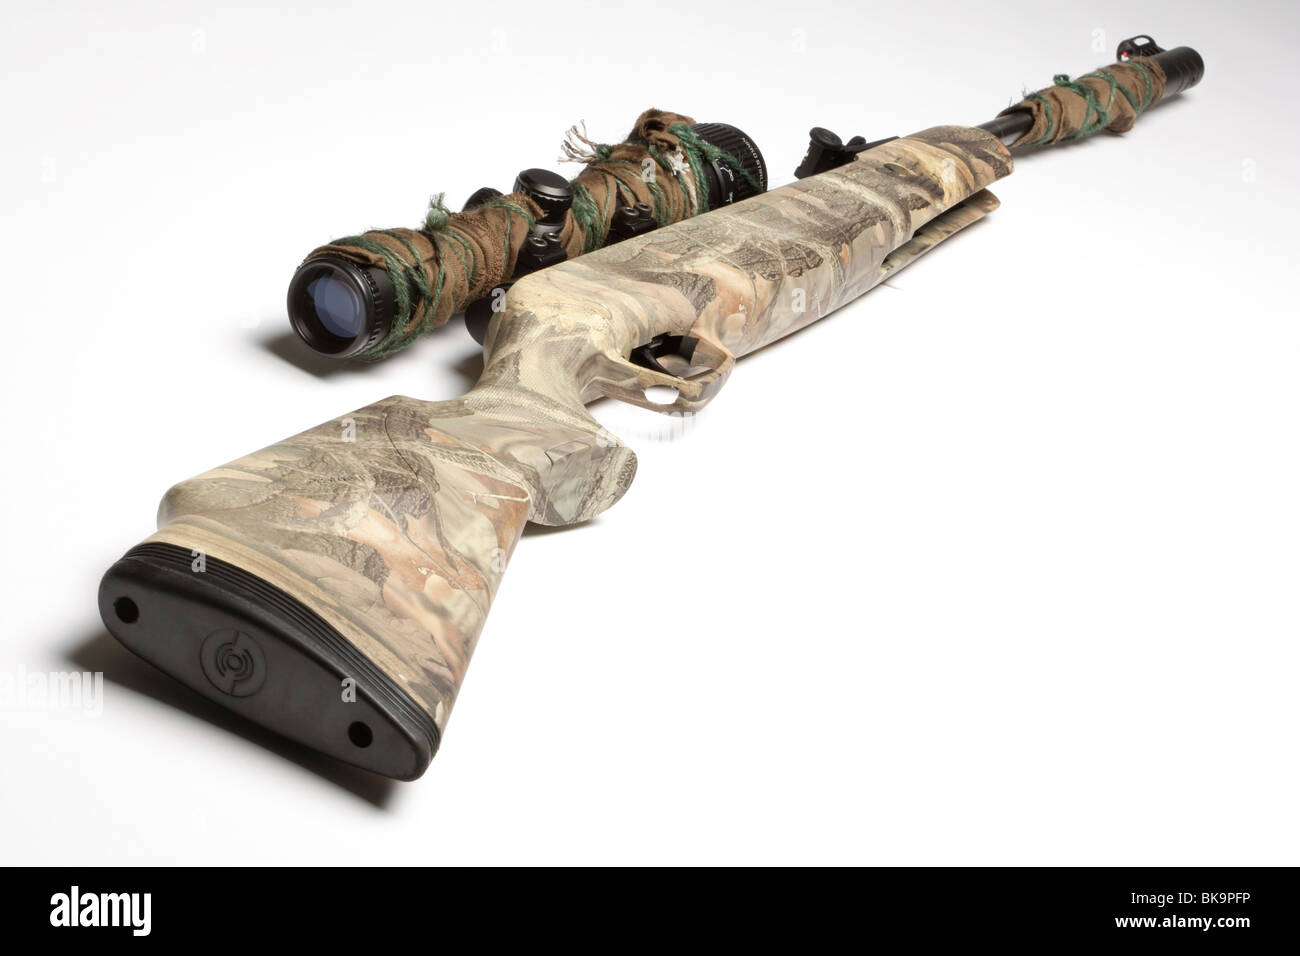 Camouflage air rifle gun with telescopic sights Stock Photo